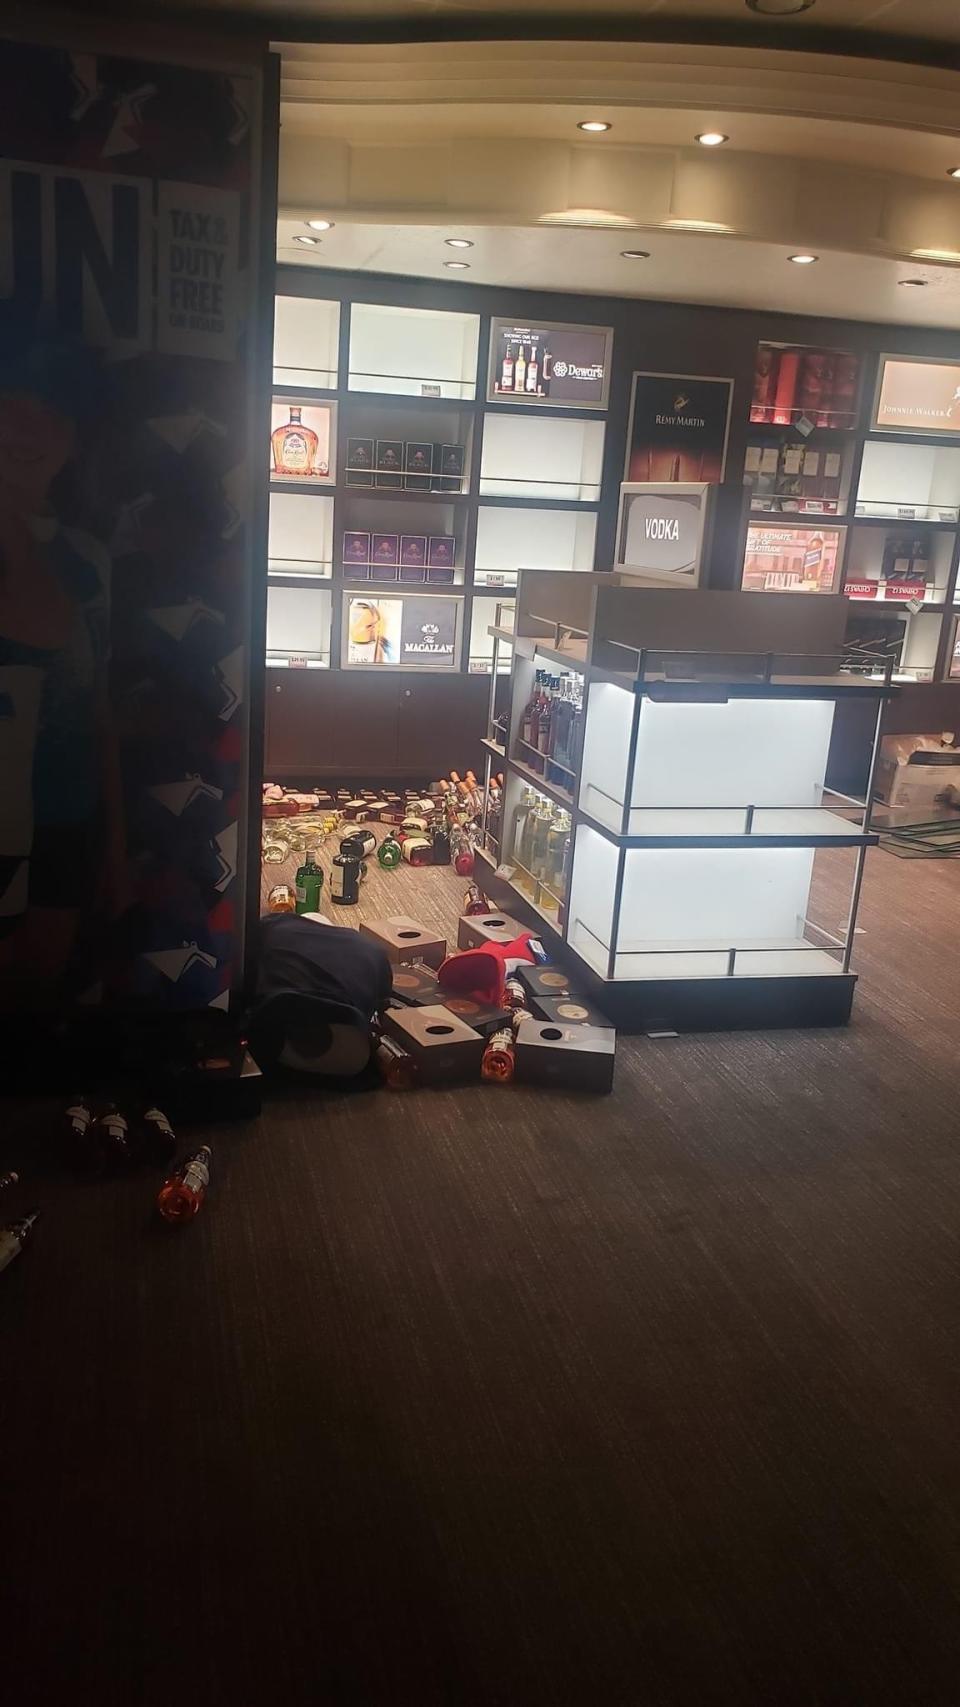 Store with bottles spilled about the floor.